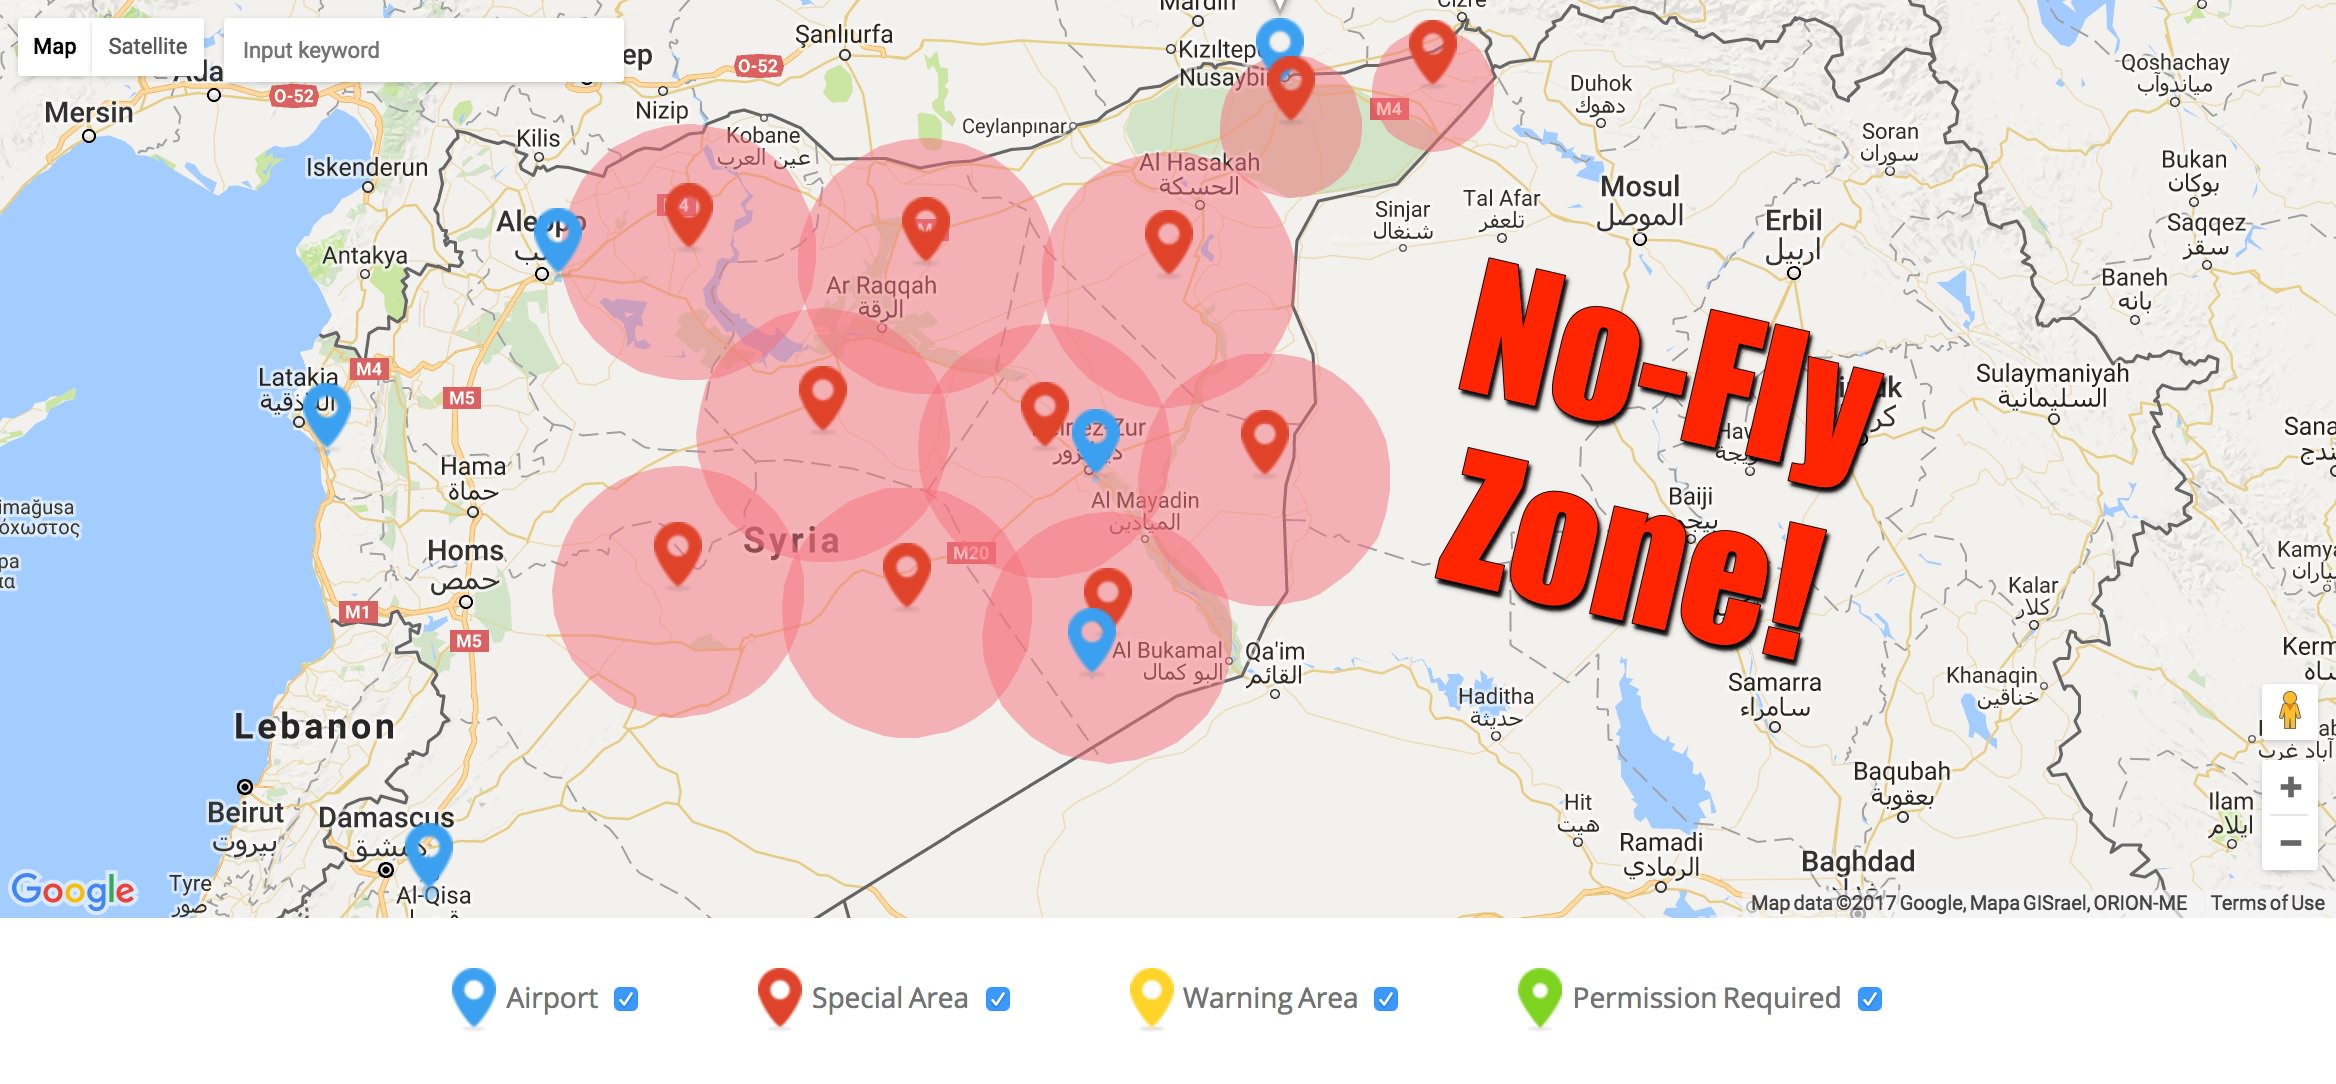 spørgeskema Udfordring Onset DJI quietly adds large parts of Syria and Iraq to its no-fly zone for drones